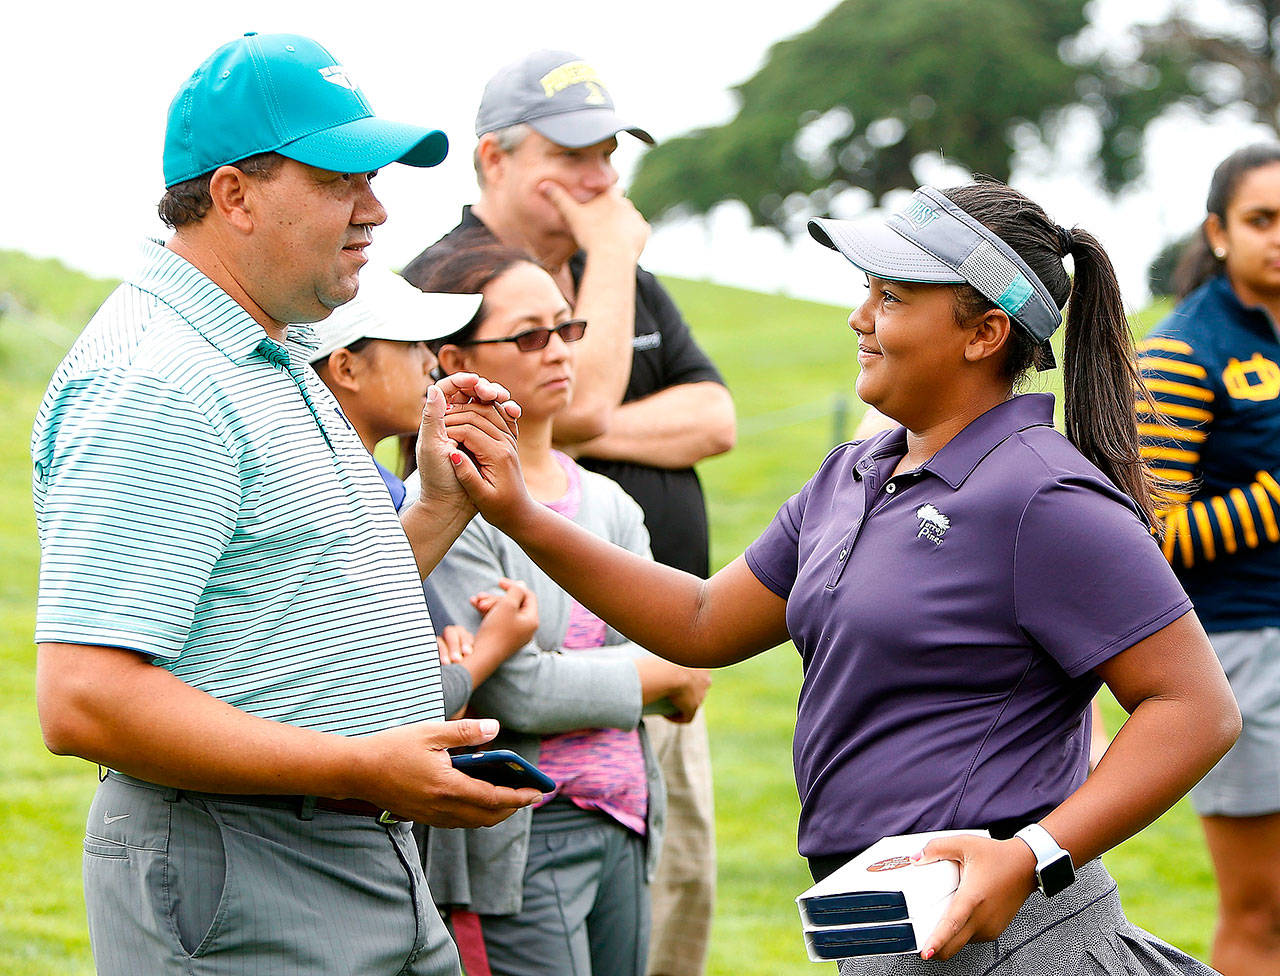 Kasey Maralack celebrates with her father, David, after winning the Overall girls 12-13 years division of the Drive, Chip and Putt Western Region qualifying tournament at The Olympic Club on Sept. 9, in Daly City, California. (Photo by Lachlan Cunningham/Getty Images for DC&P Championship)